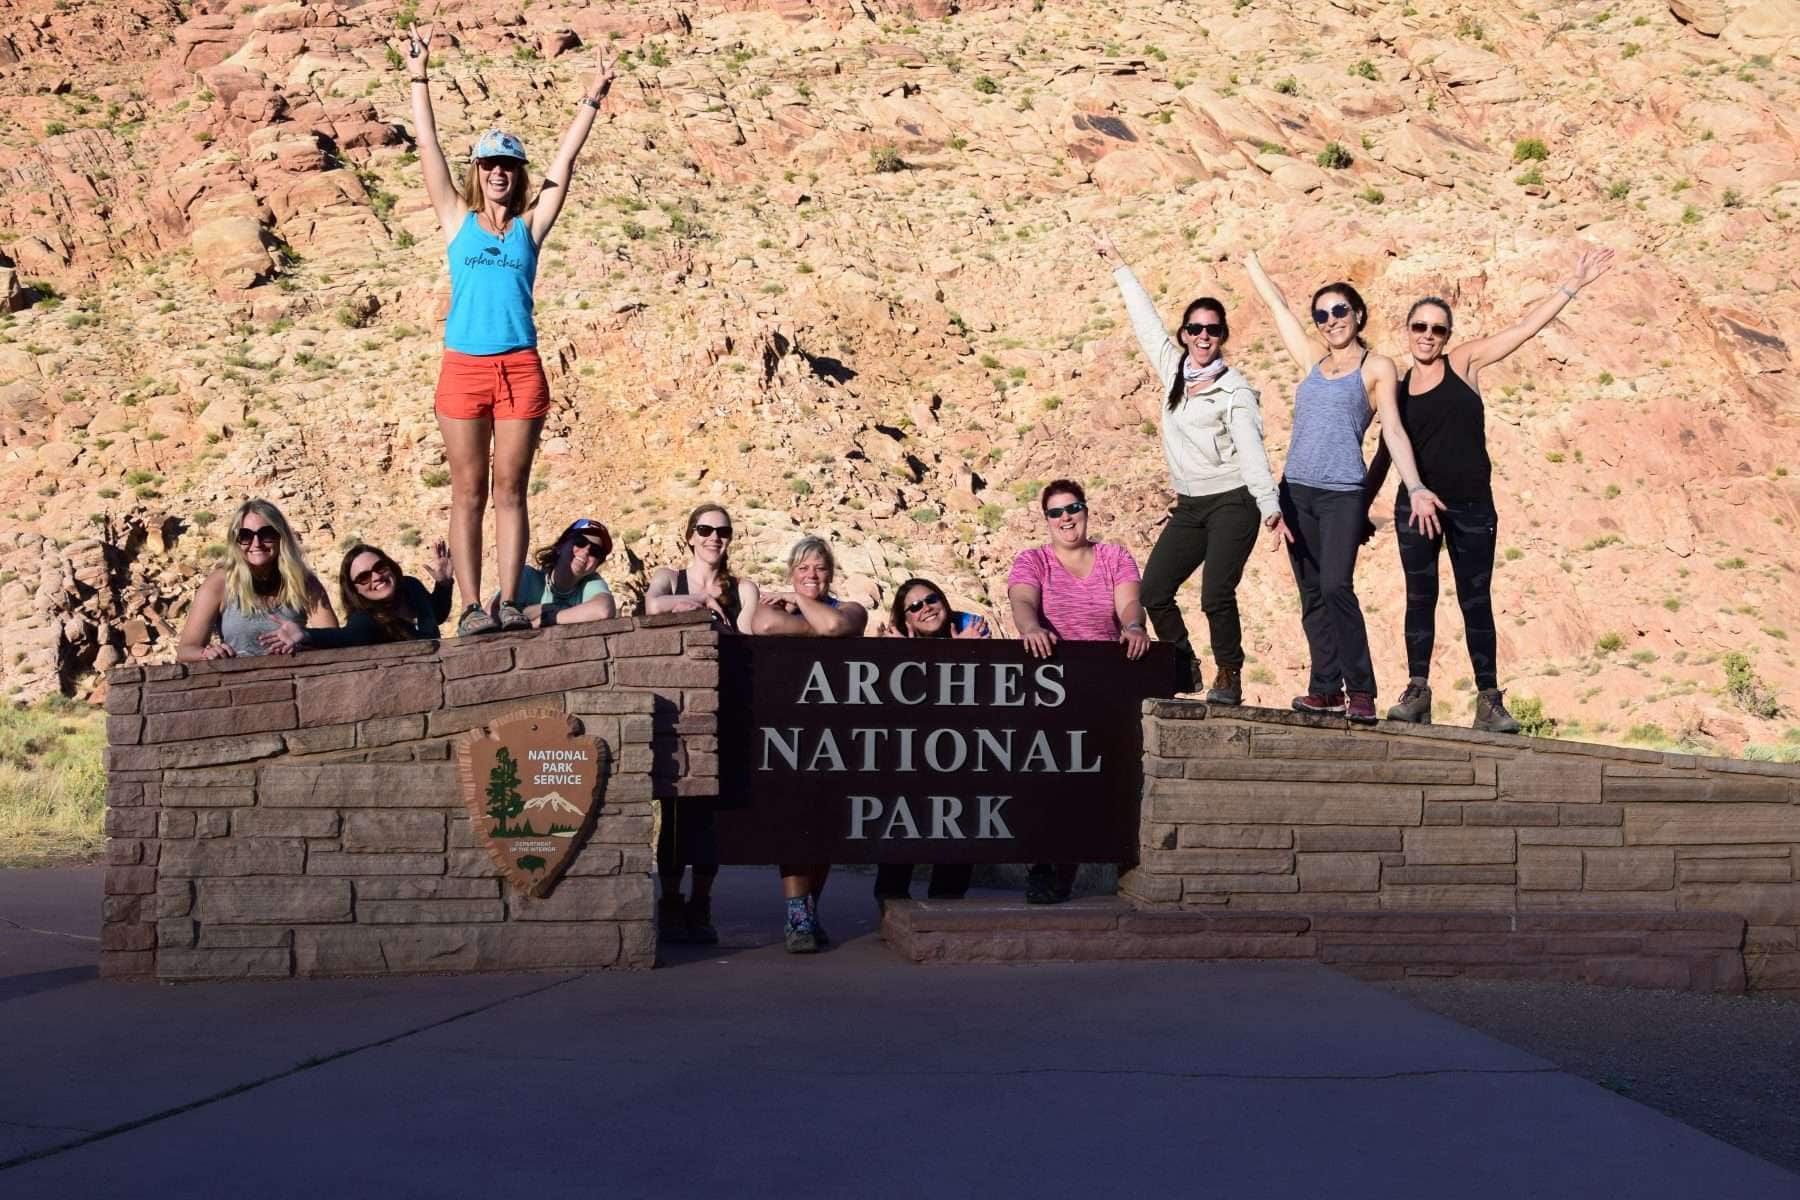 Women standing and posing on top of Arches National Park sign.